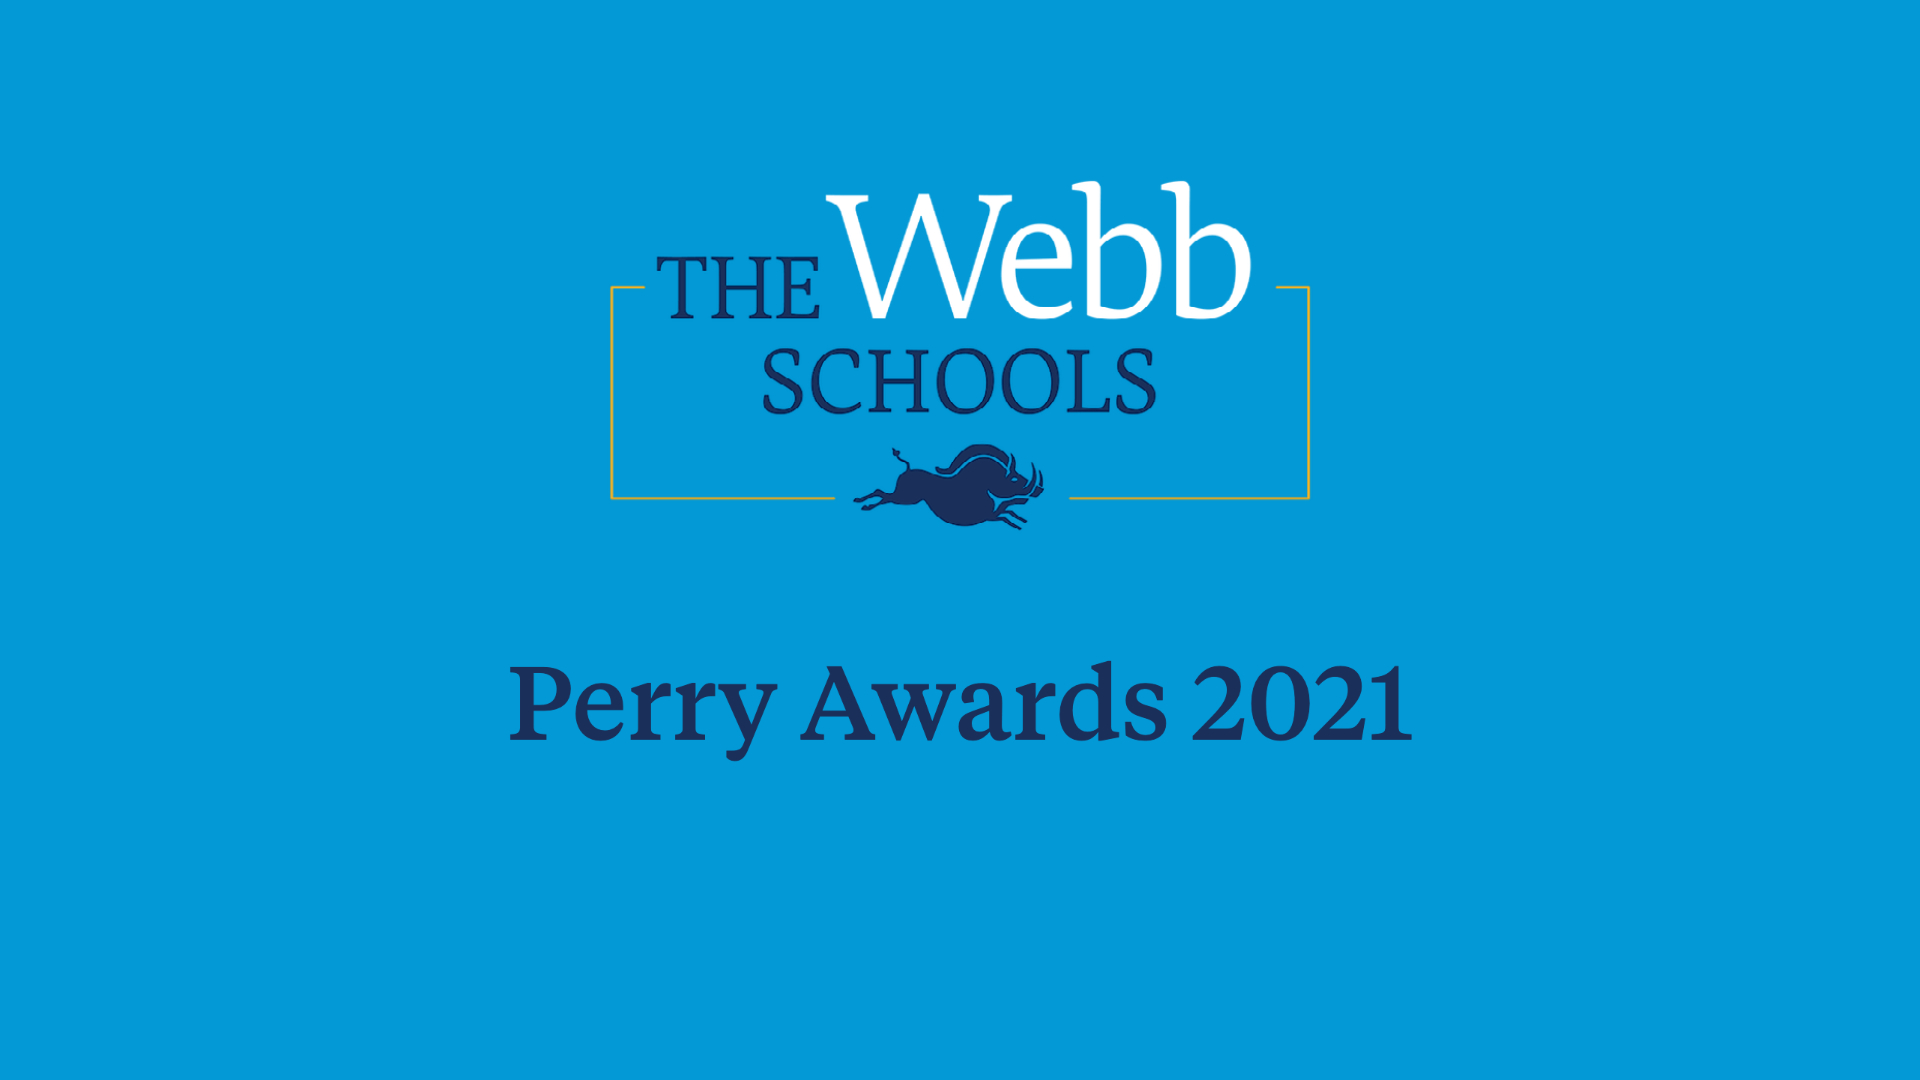 Perry Awards 2021 graphic